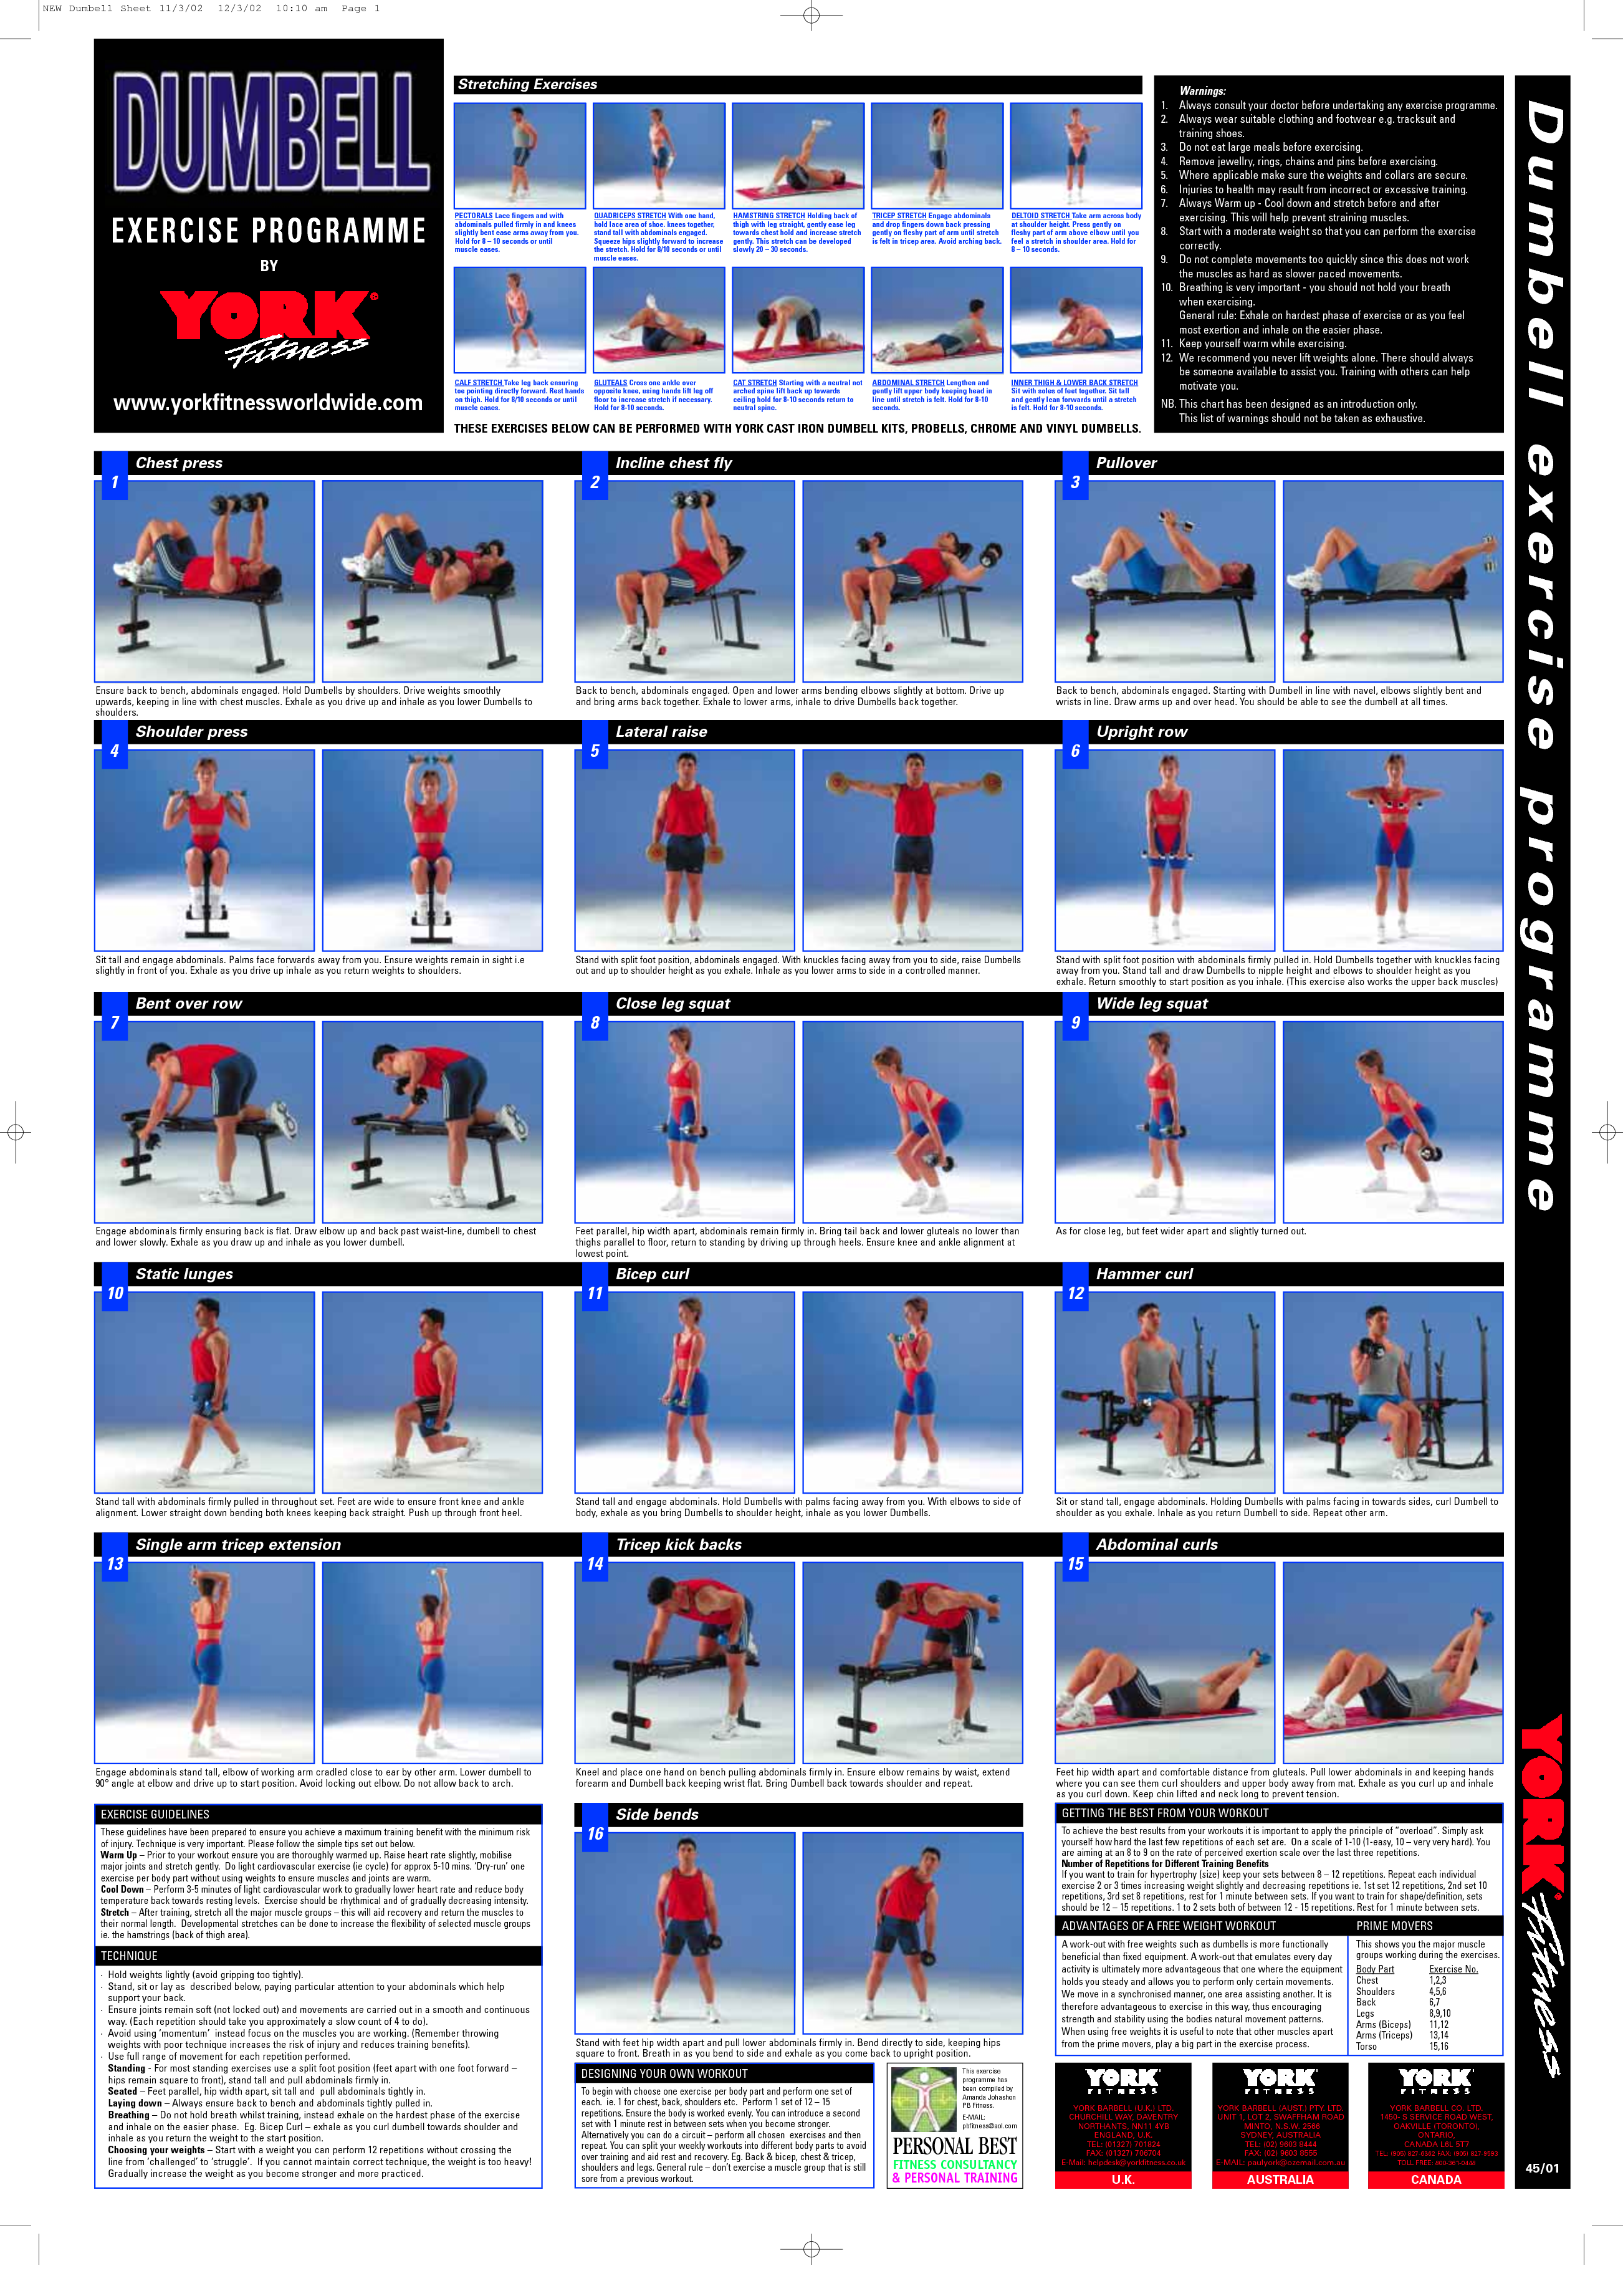 dumbbell workout routine pdf | Amtworkout.co